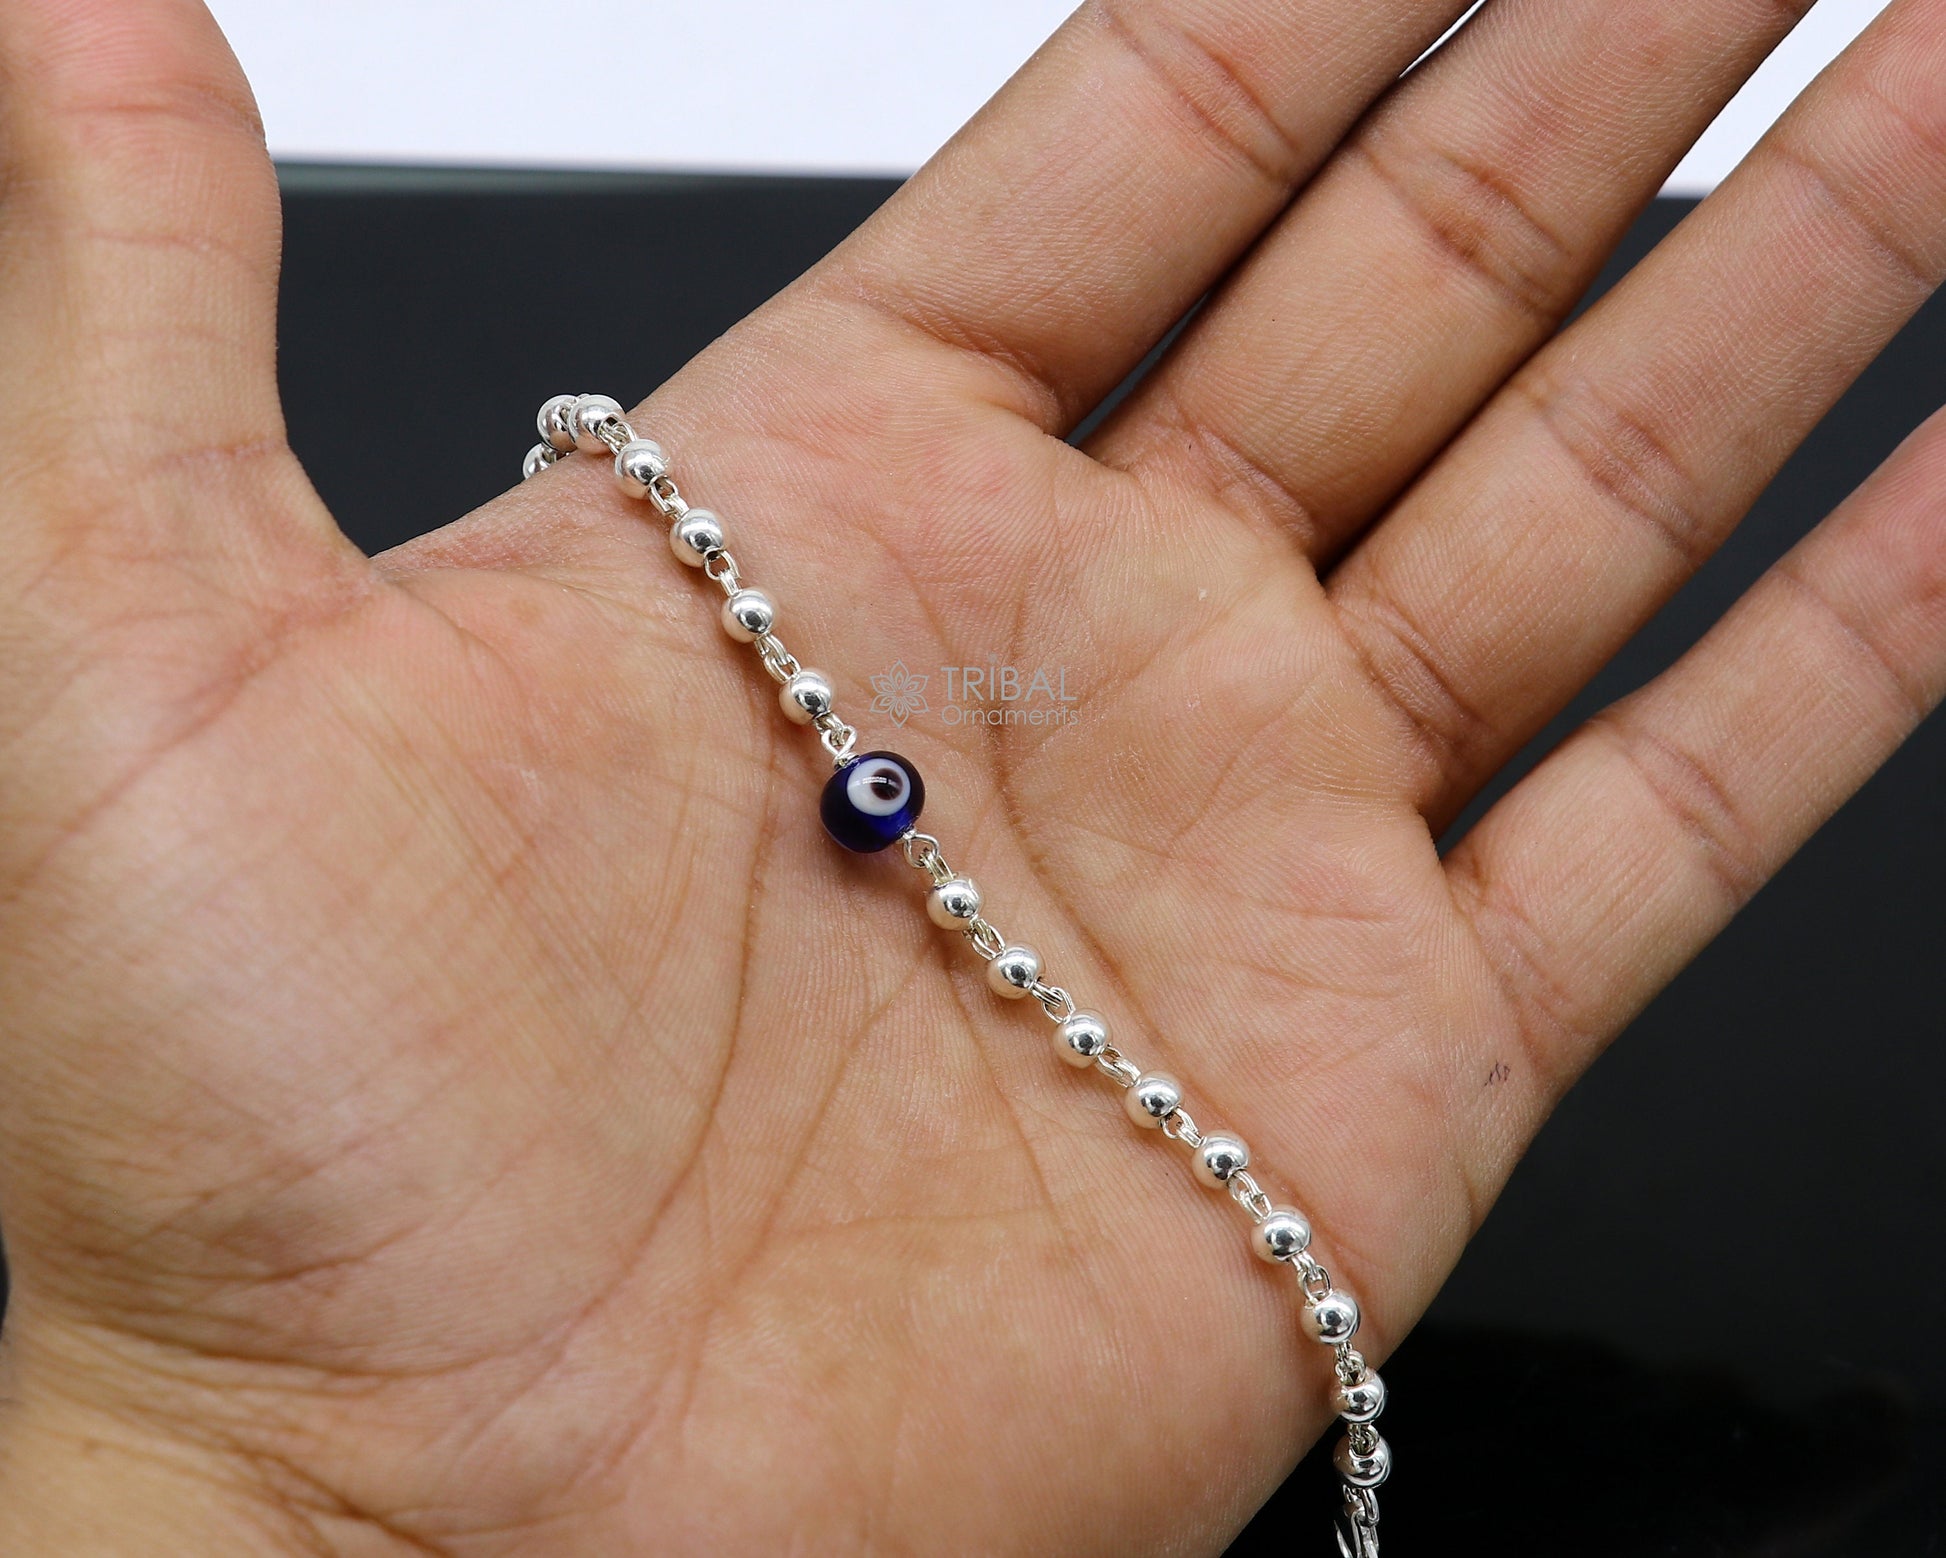 All sizes evil eye with 925 sterling silver beaded bracelet or anklet for girls and kids/your baby, silver Nazariya/nazarbattu bbr502 - TRIBAL ORNAMENTS